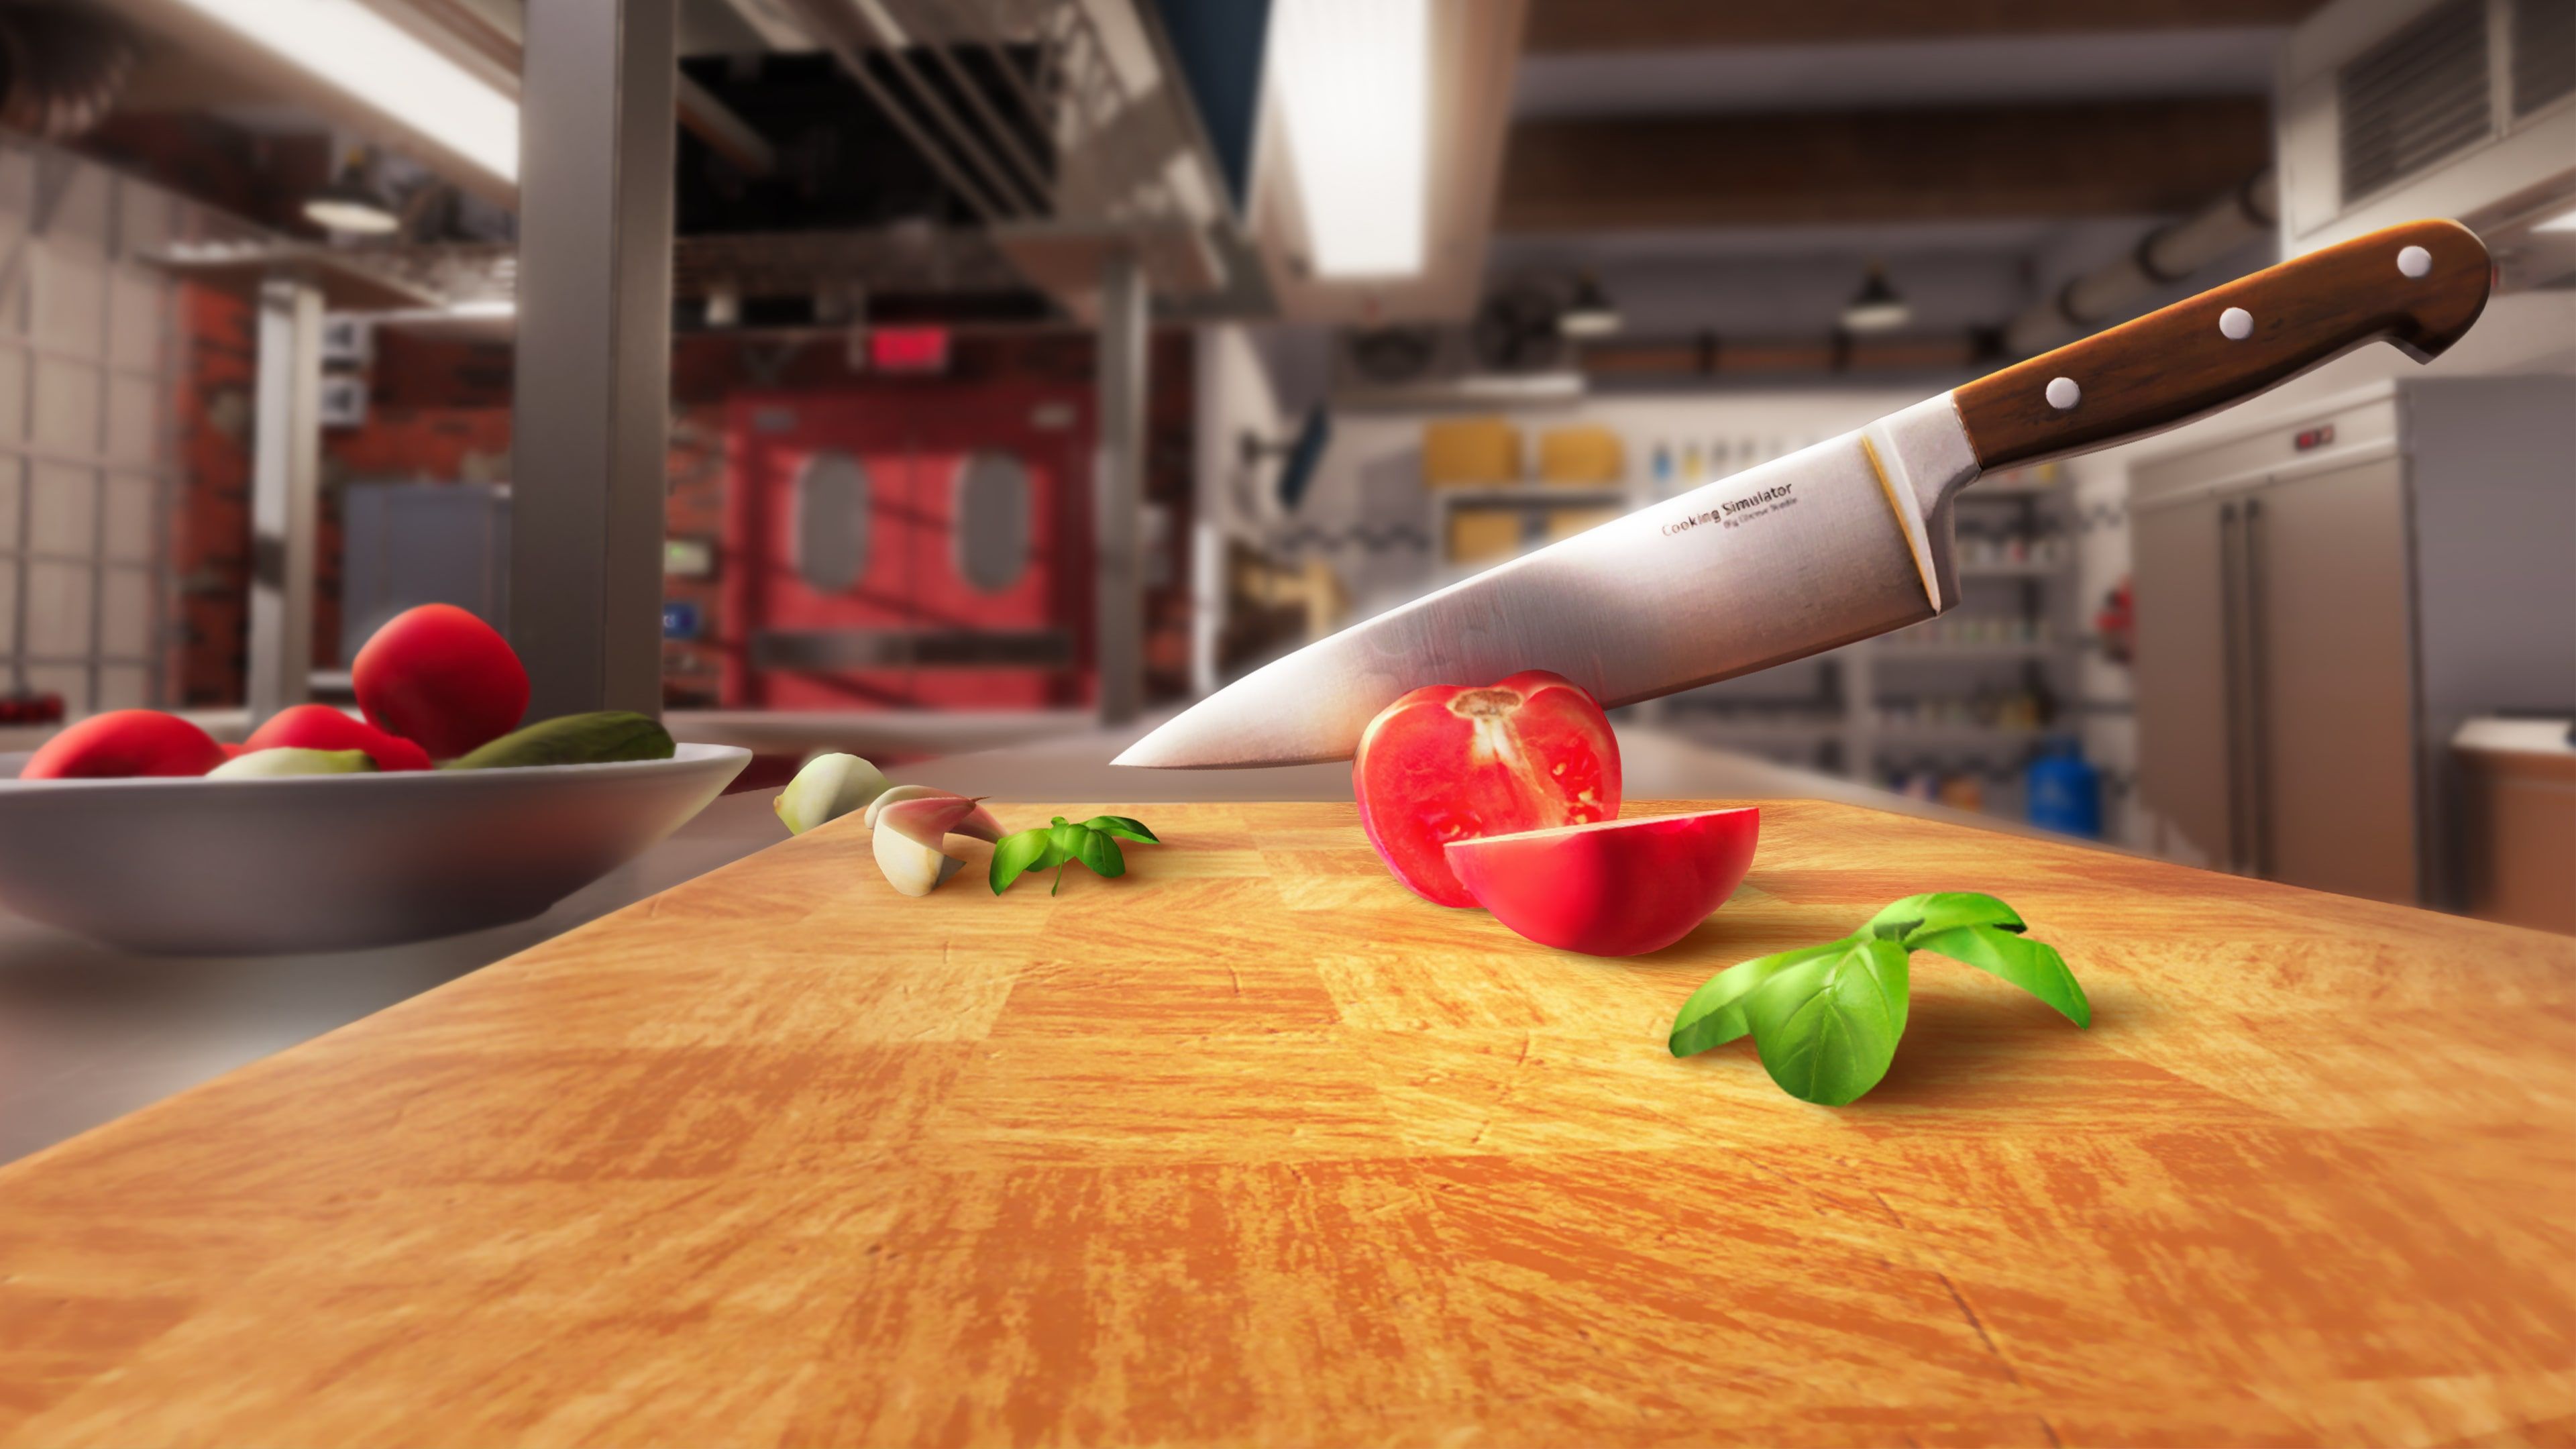 Cooking Simulator cover image